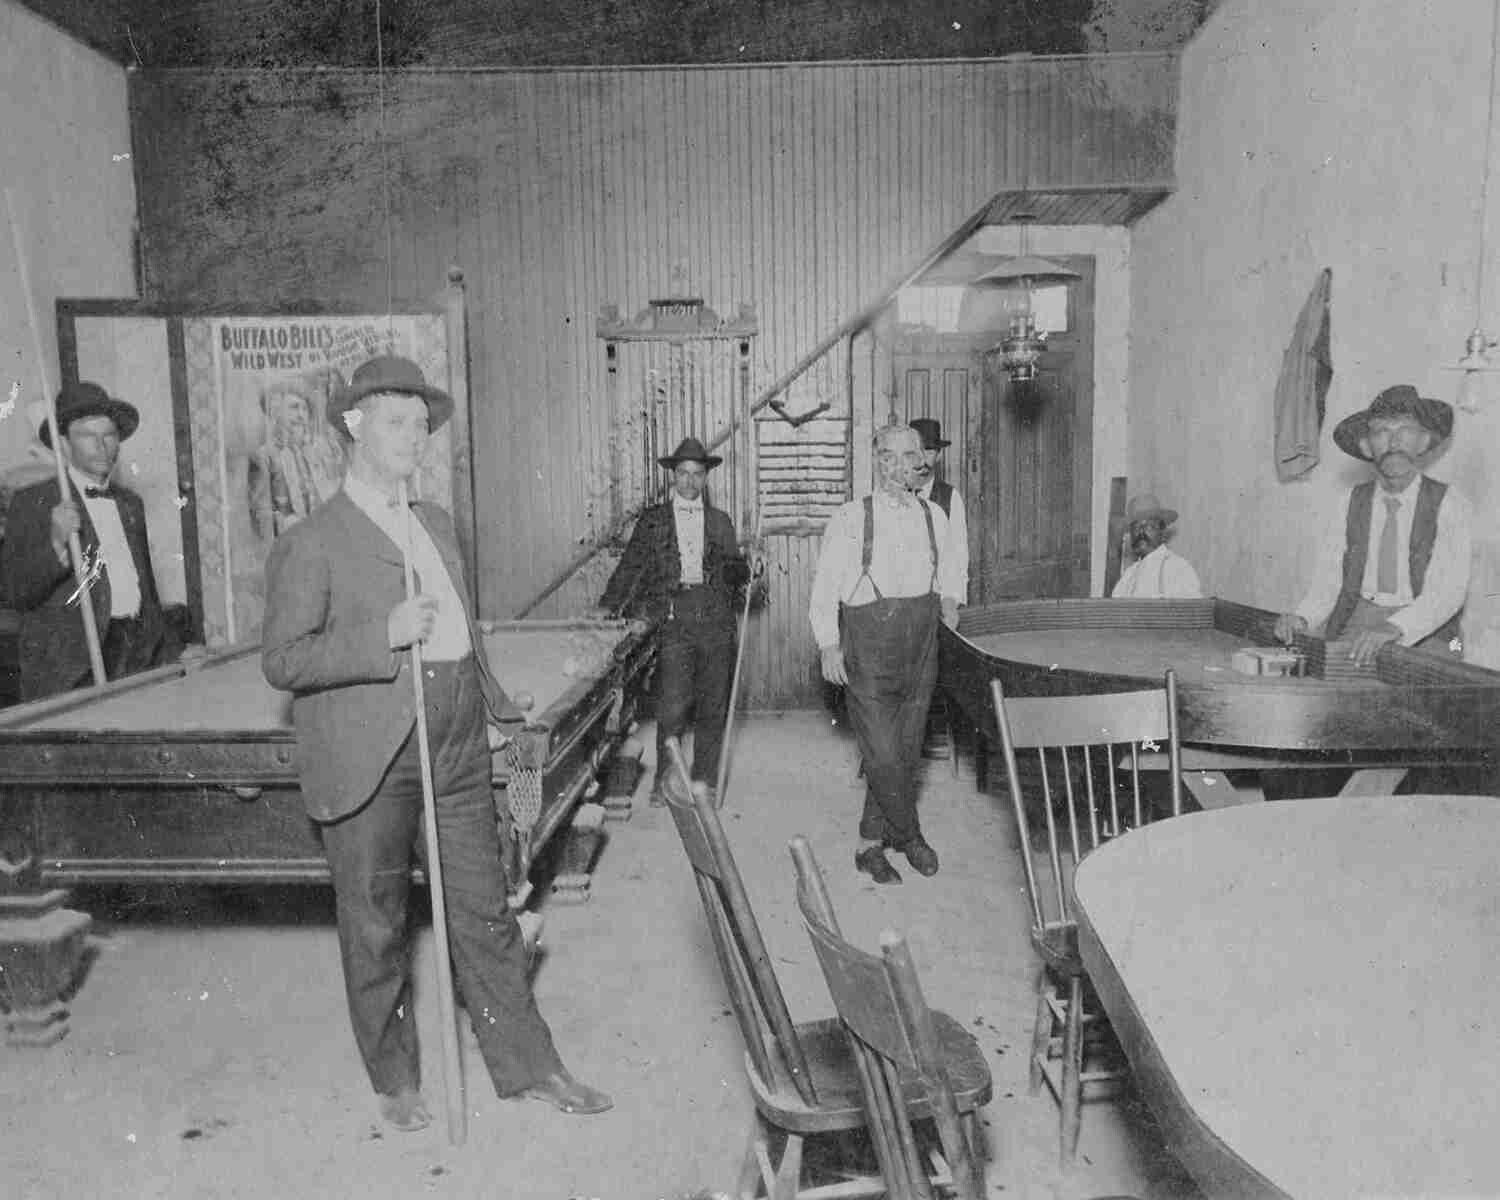 Group Of Old West Cowboys Playing Pool  At Rest  Vintage Distressed photo  8X10